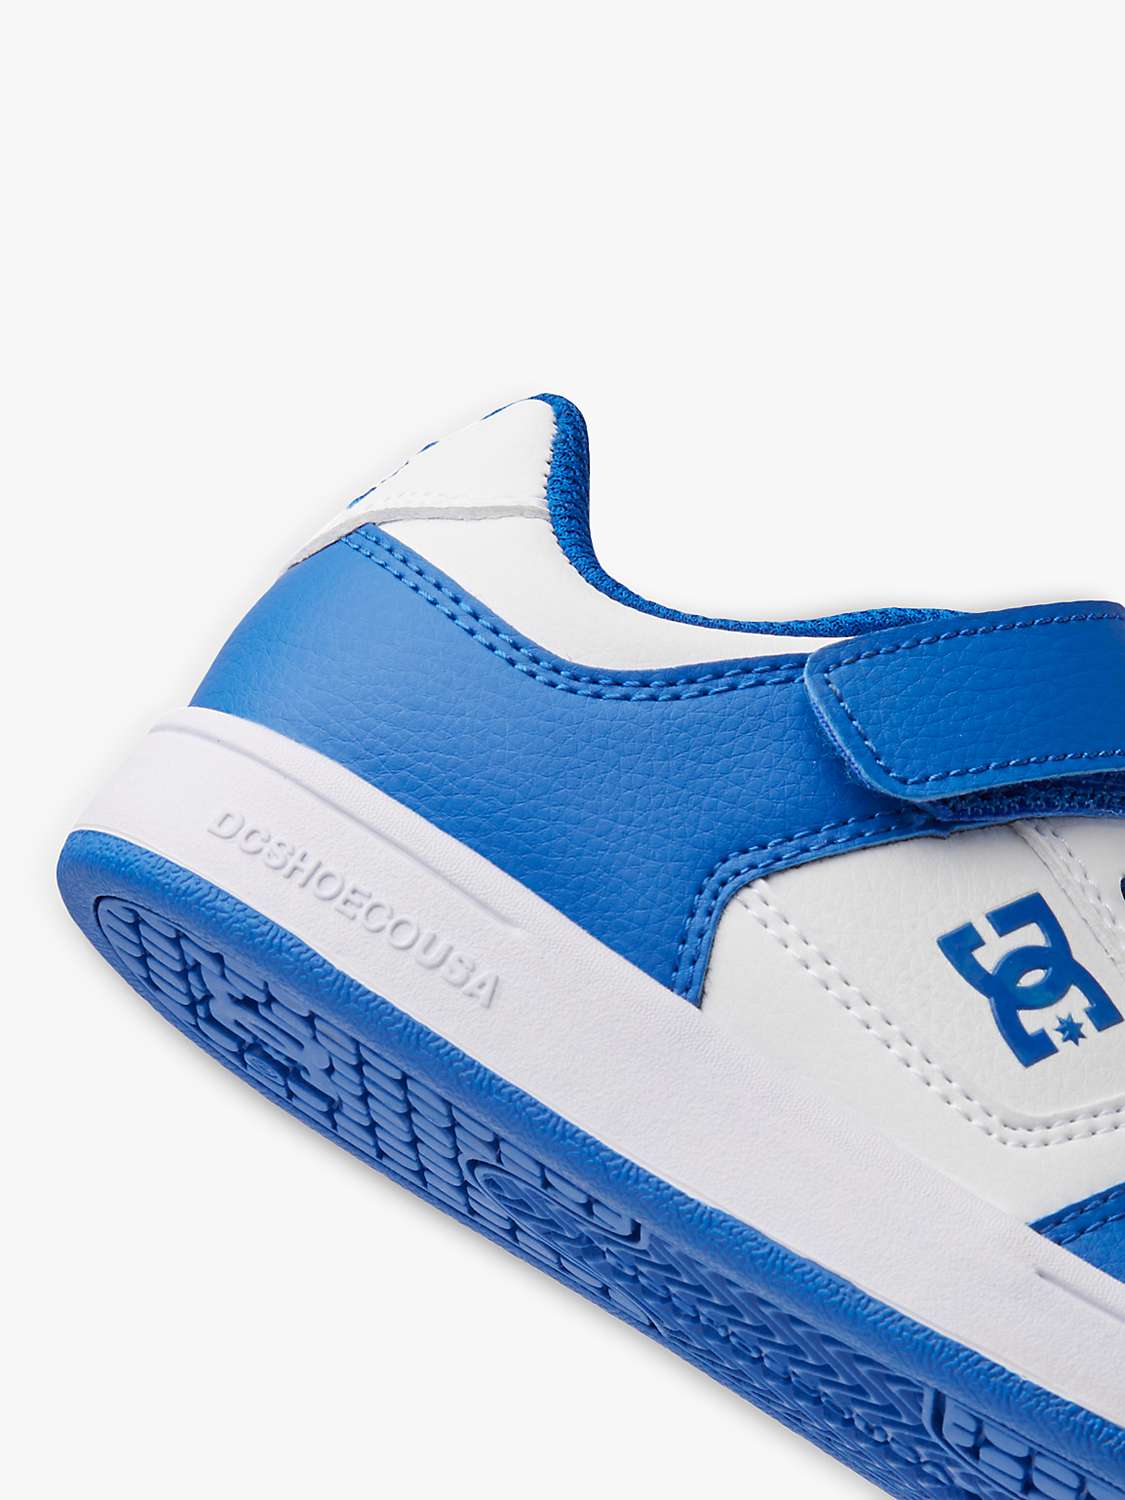 Buy DC Shoes Kids' Manteca 4 Trainers, White/Blue Online at johnlewis.com